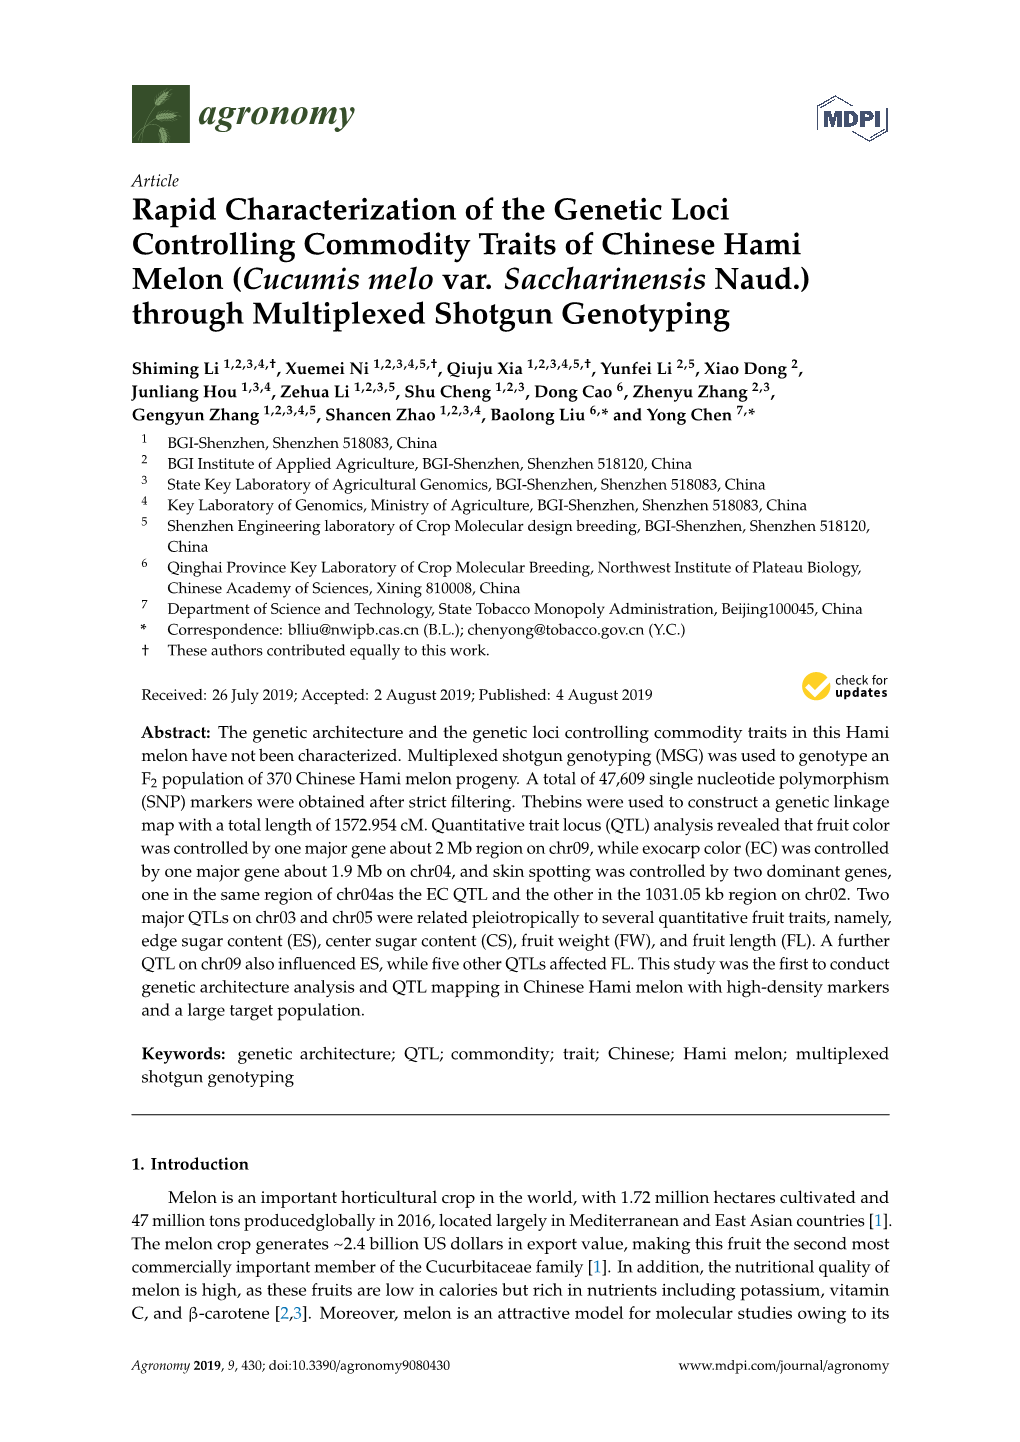 Rapid Characterization of the Genetic Loci Controlling Commodity Traits of Chinese Hami Melon (Cucumis Melo Var